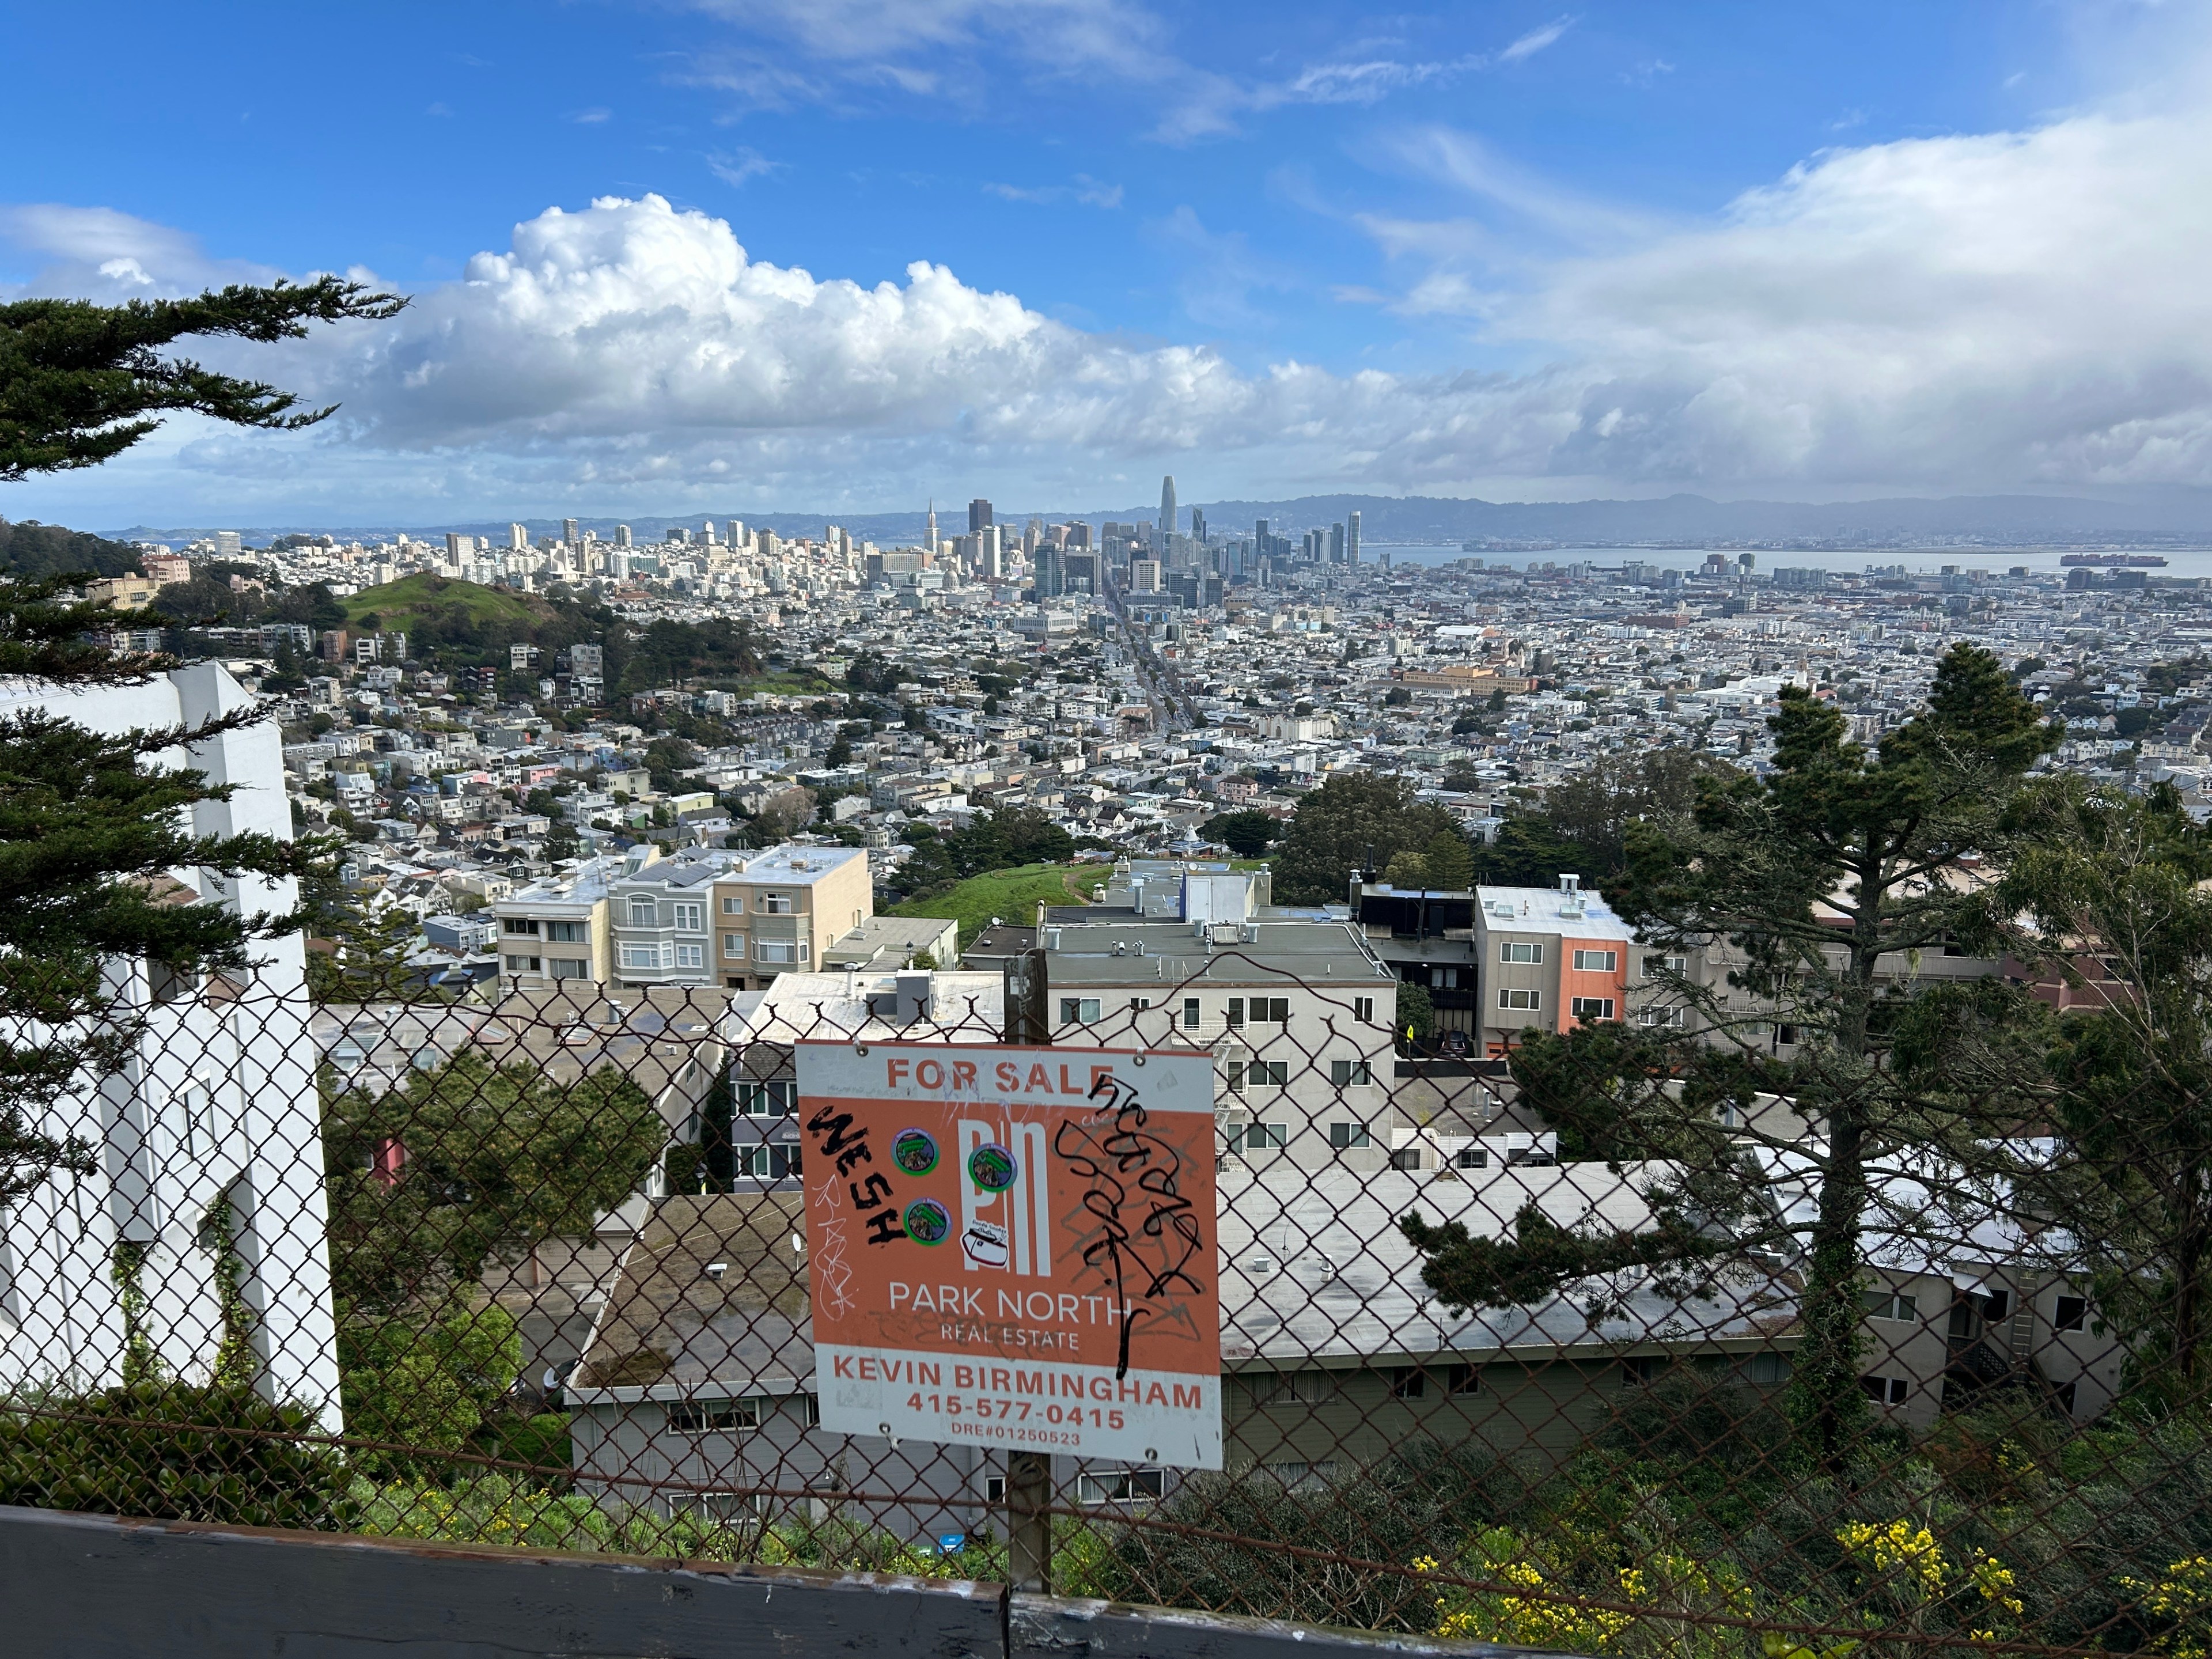 a view of San Francisco on a partly cloudy day through a chain-link fence high on a hill, flanked by trees